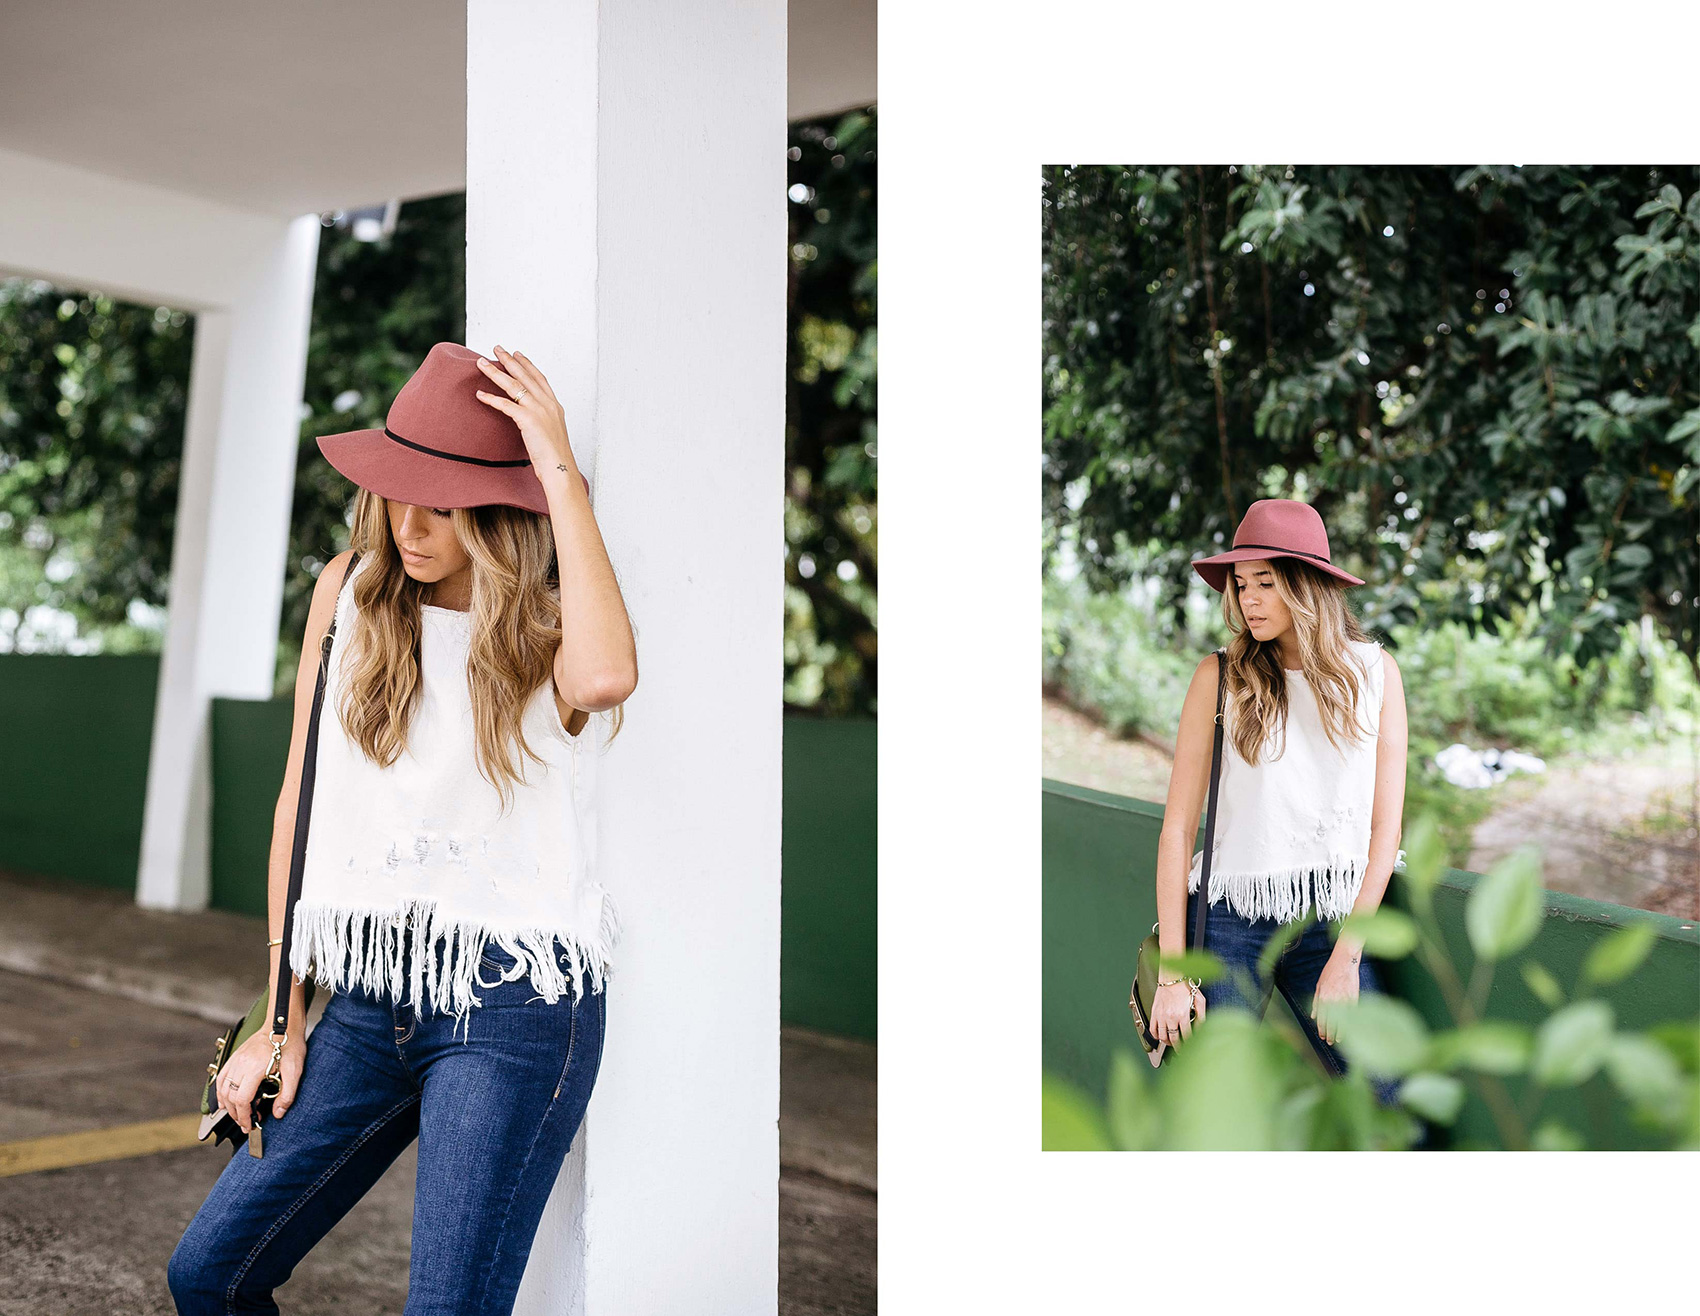 Maristella wearing a fringe hem detail top from Zara and jeans from Stradivarius